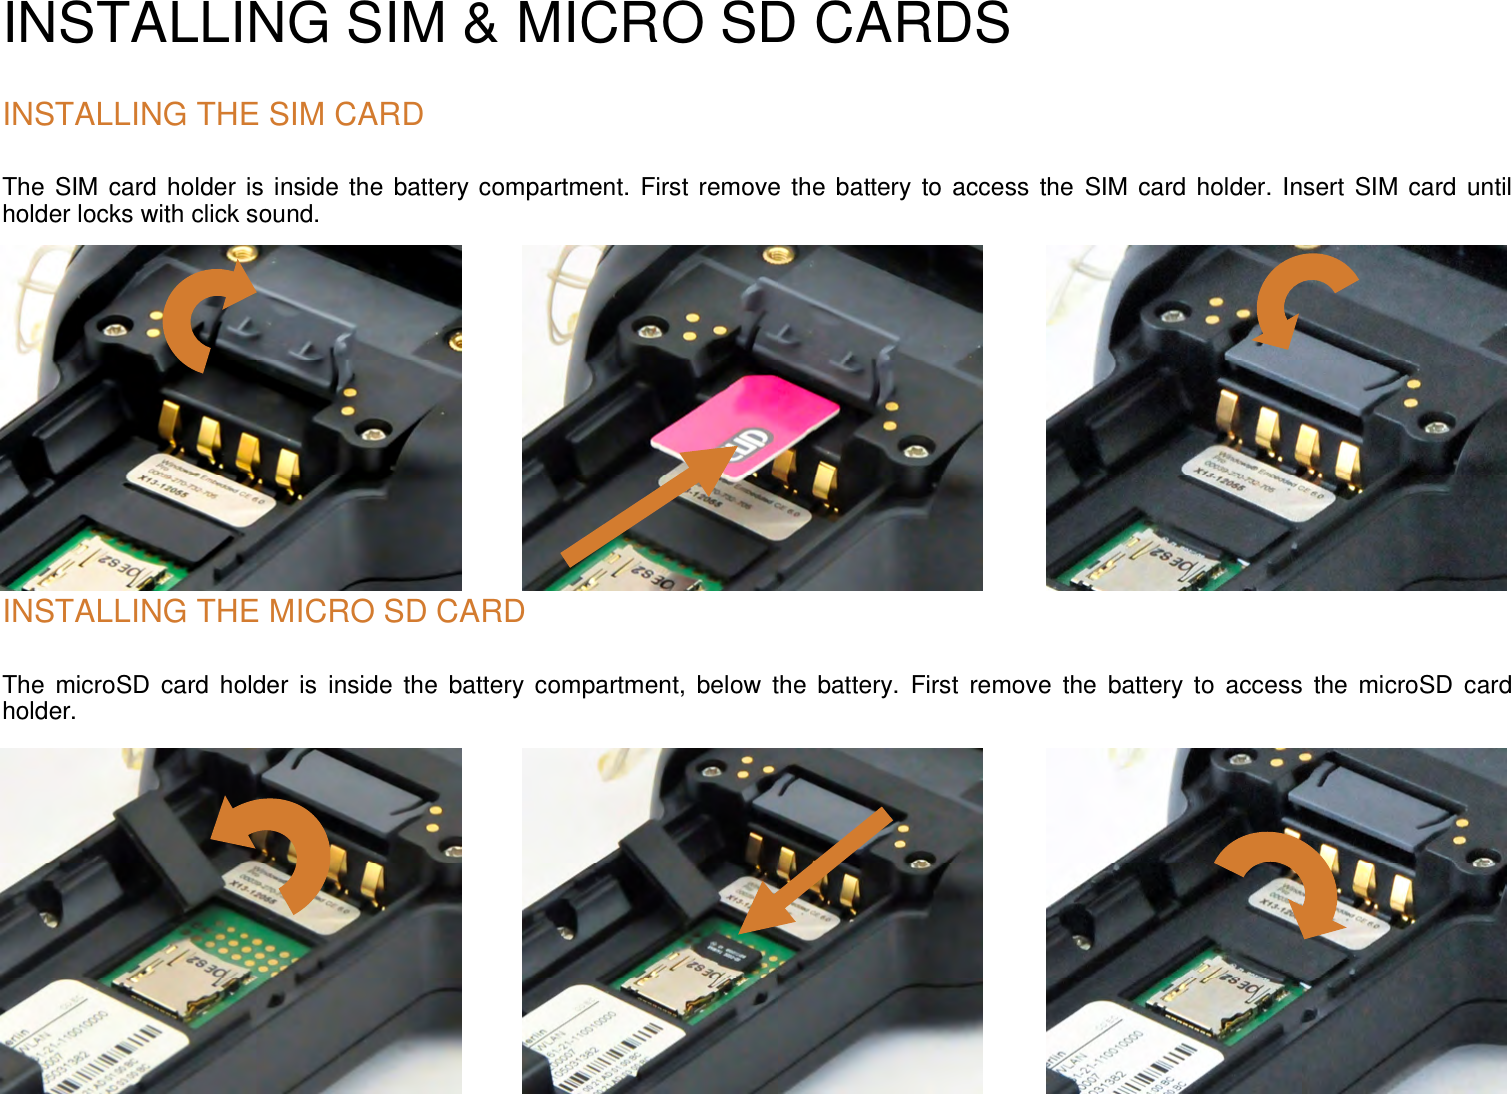 INSTALLING SIM &amp; MICRO SD CARDS INSTALLING THE SIM CARD The  SIM card  holder is inside the  battery compartment. First remove the battery  to access  the  SIM card holder. Insert  SIM card  until holder locks with click sound.          INSTALLING THE MICRO SD CARDThe  microSD  card  holder  is  inside  the  battery  compartment,  below  the  battery.  First  remove  the  battery  to  access  the  microSD  card holder. 